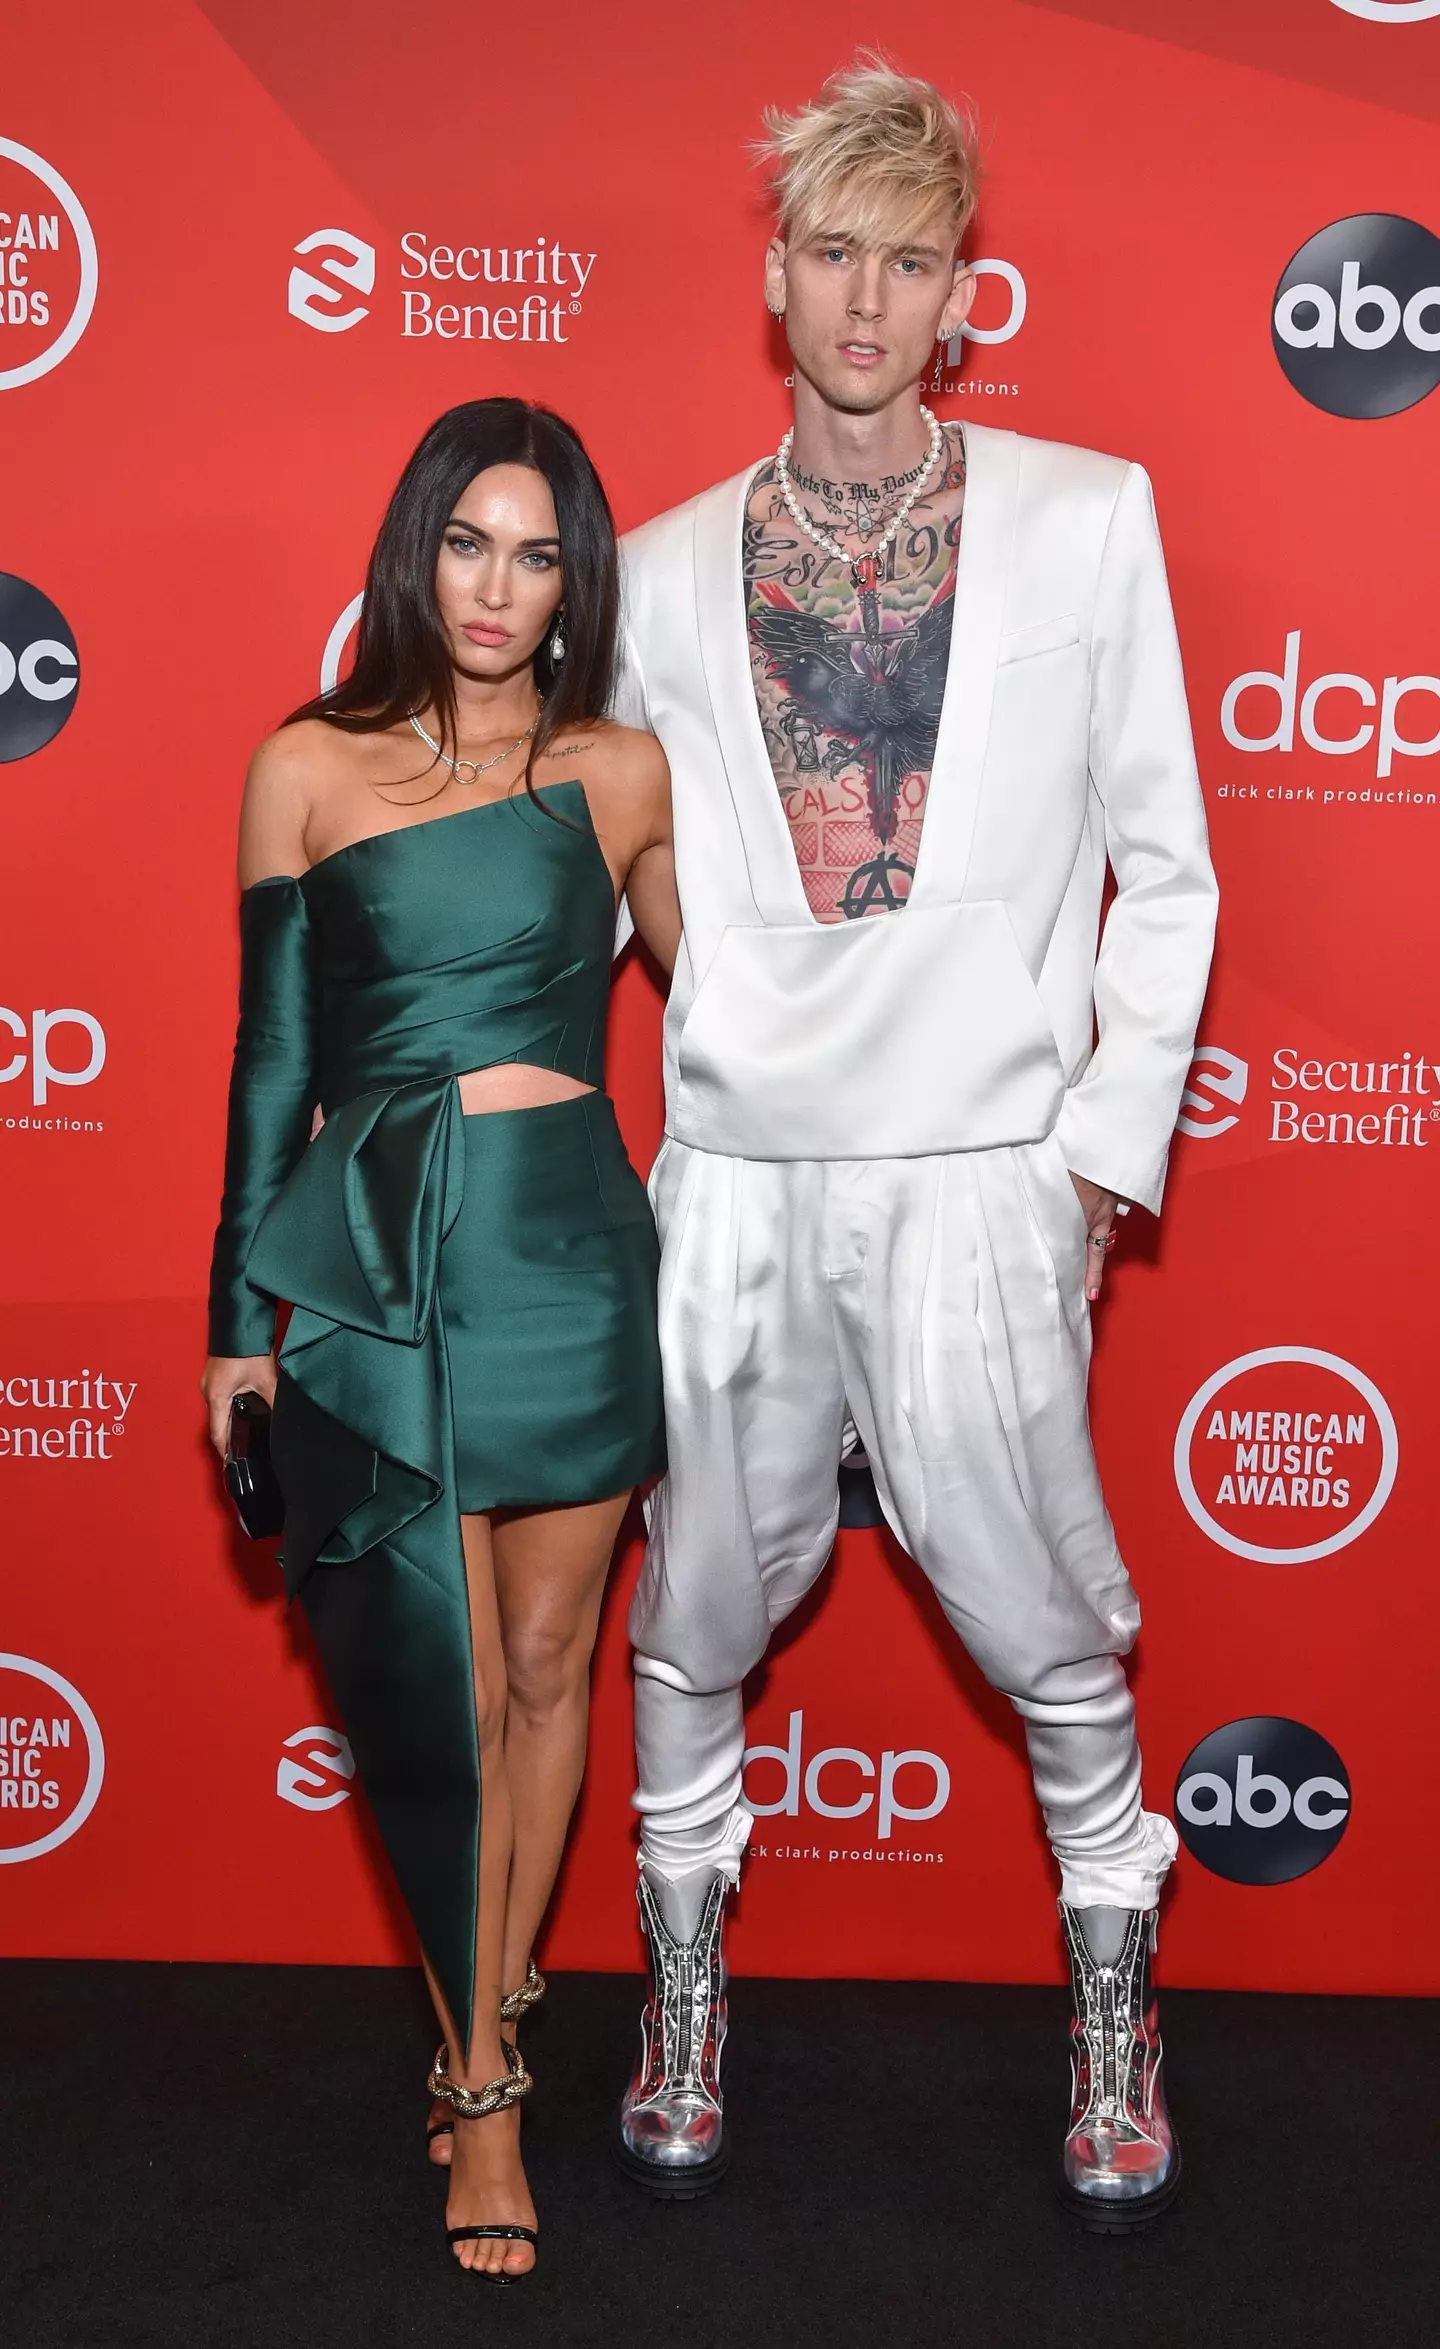 Machine Gun Kelly with Megan Fox and all his tattoos.